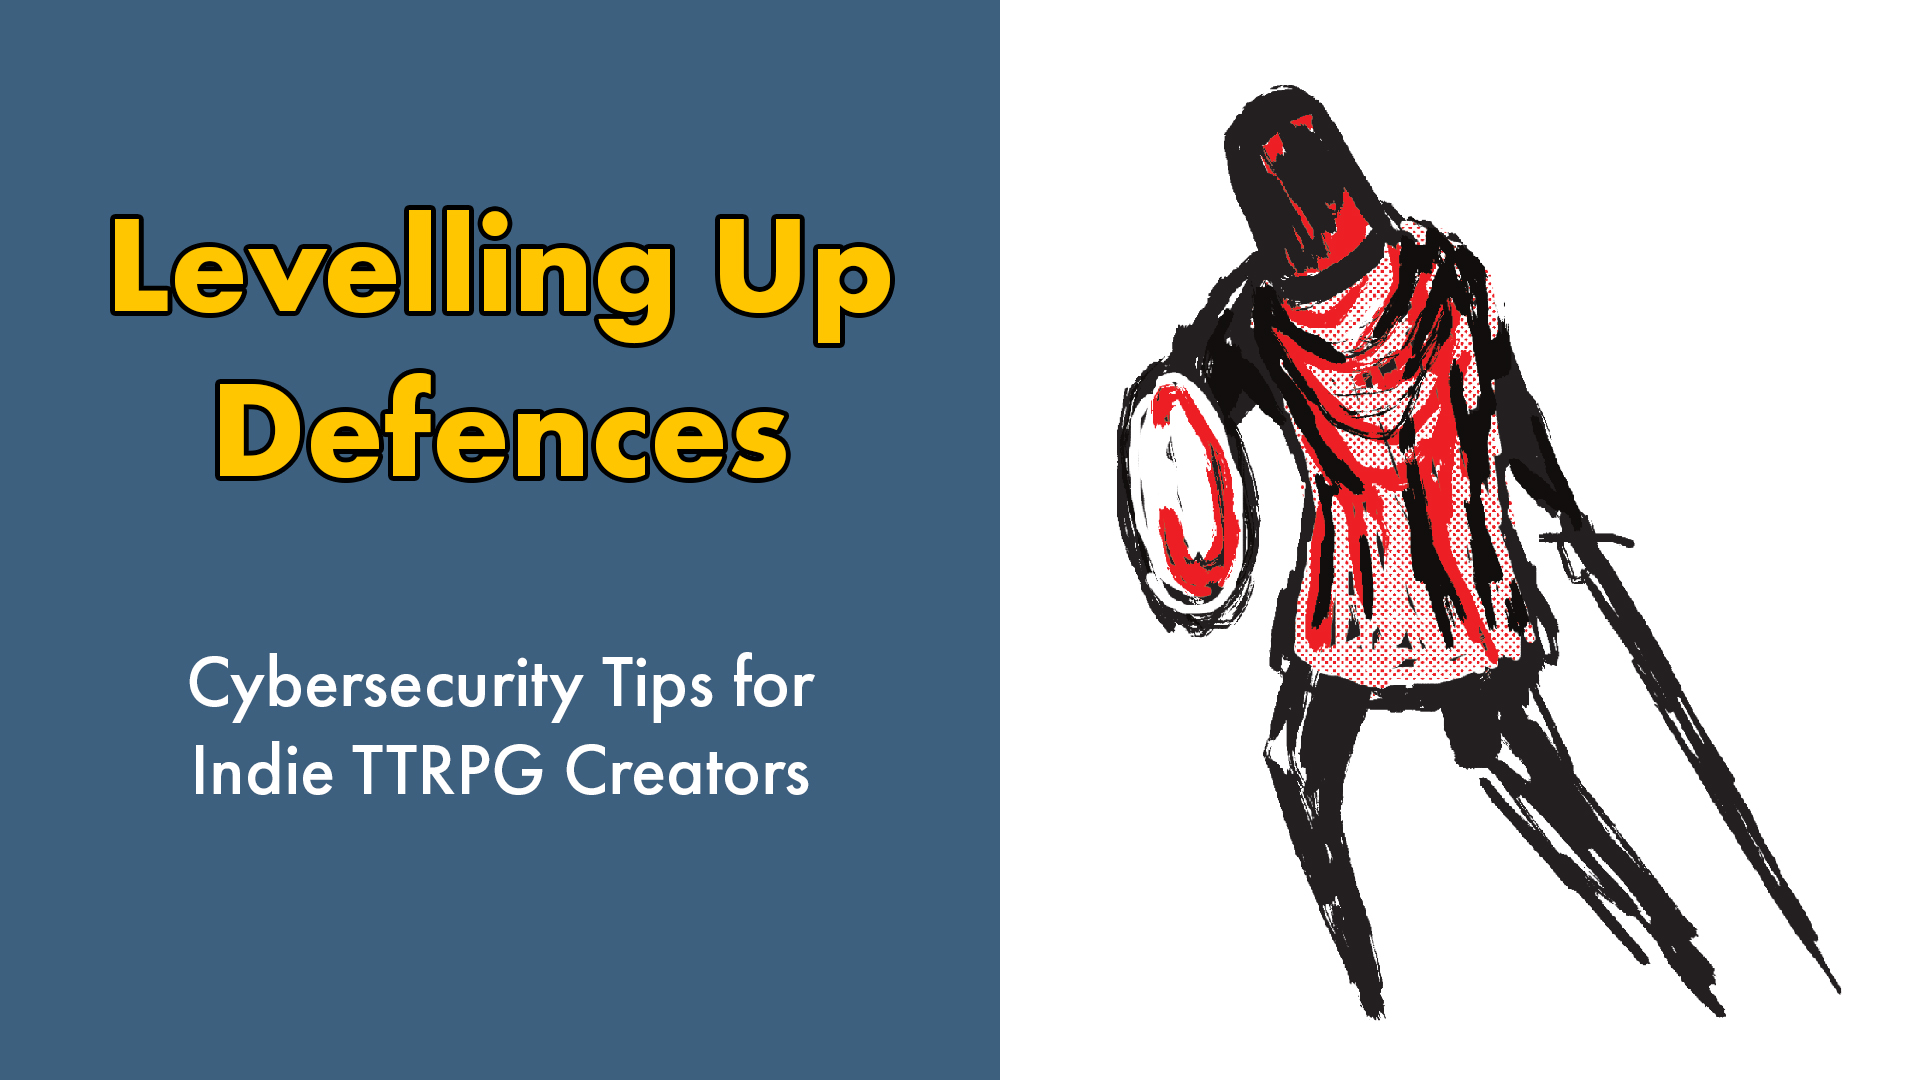 Levelling Up Defences: Cybersecurity Tips for TTRPG Creators